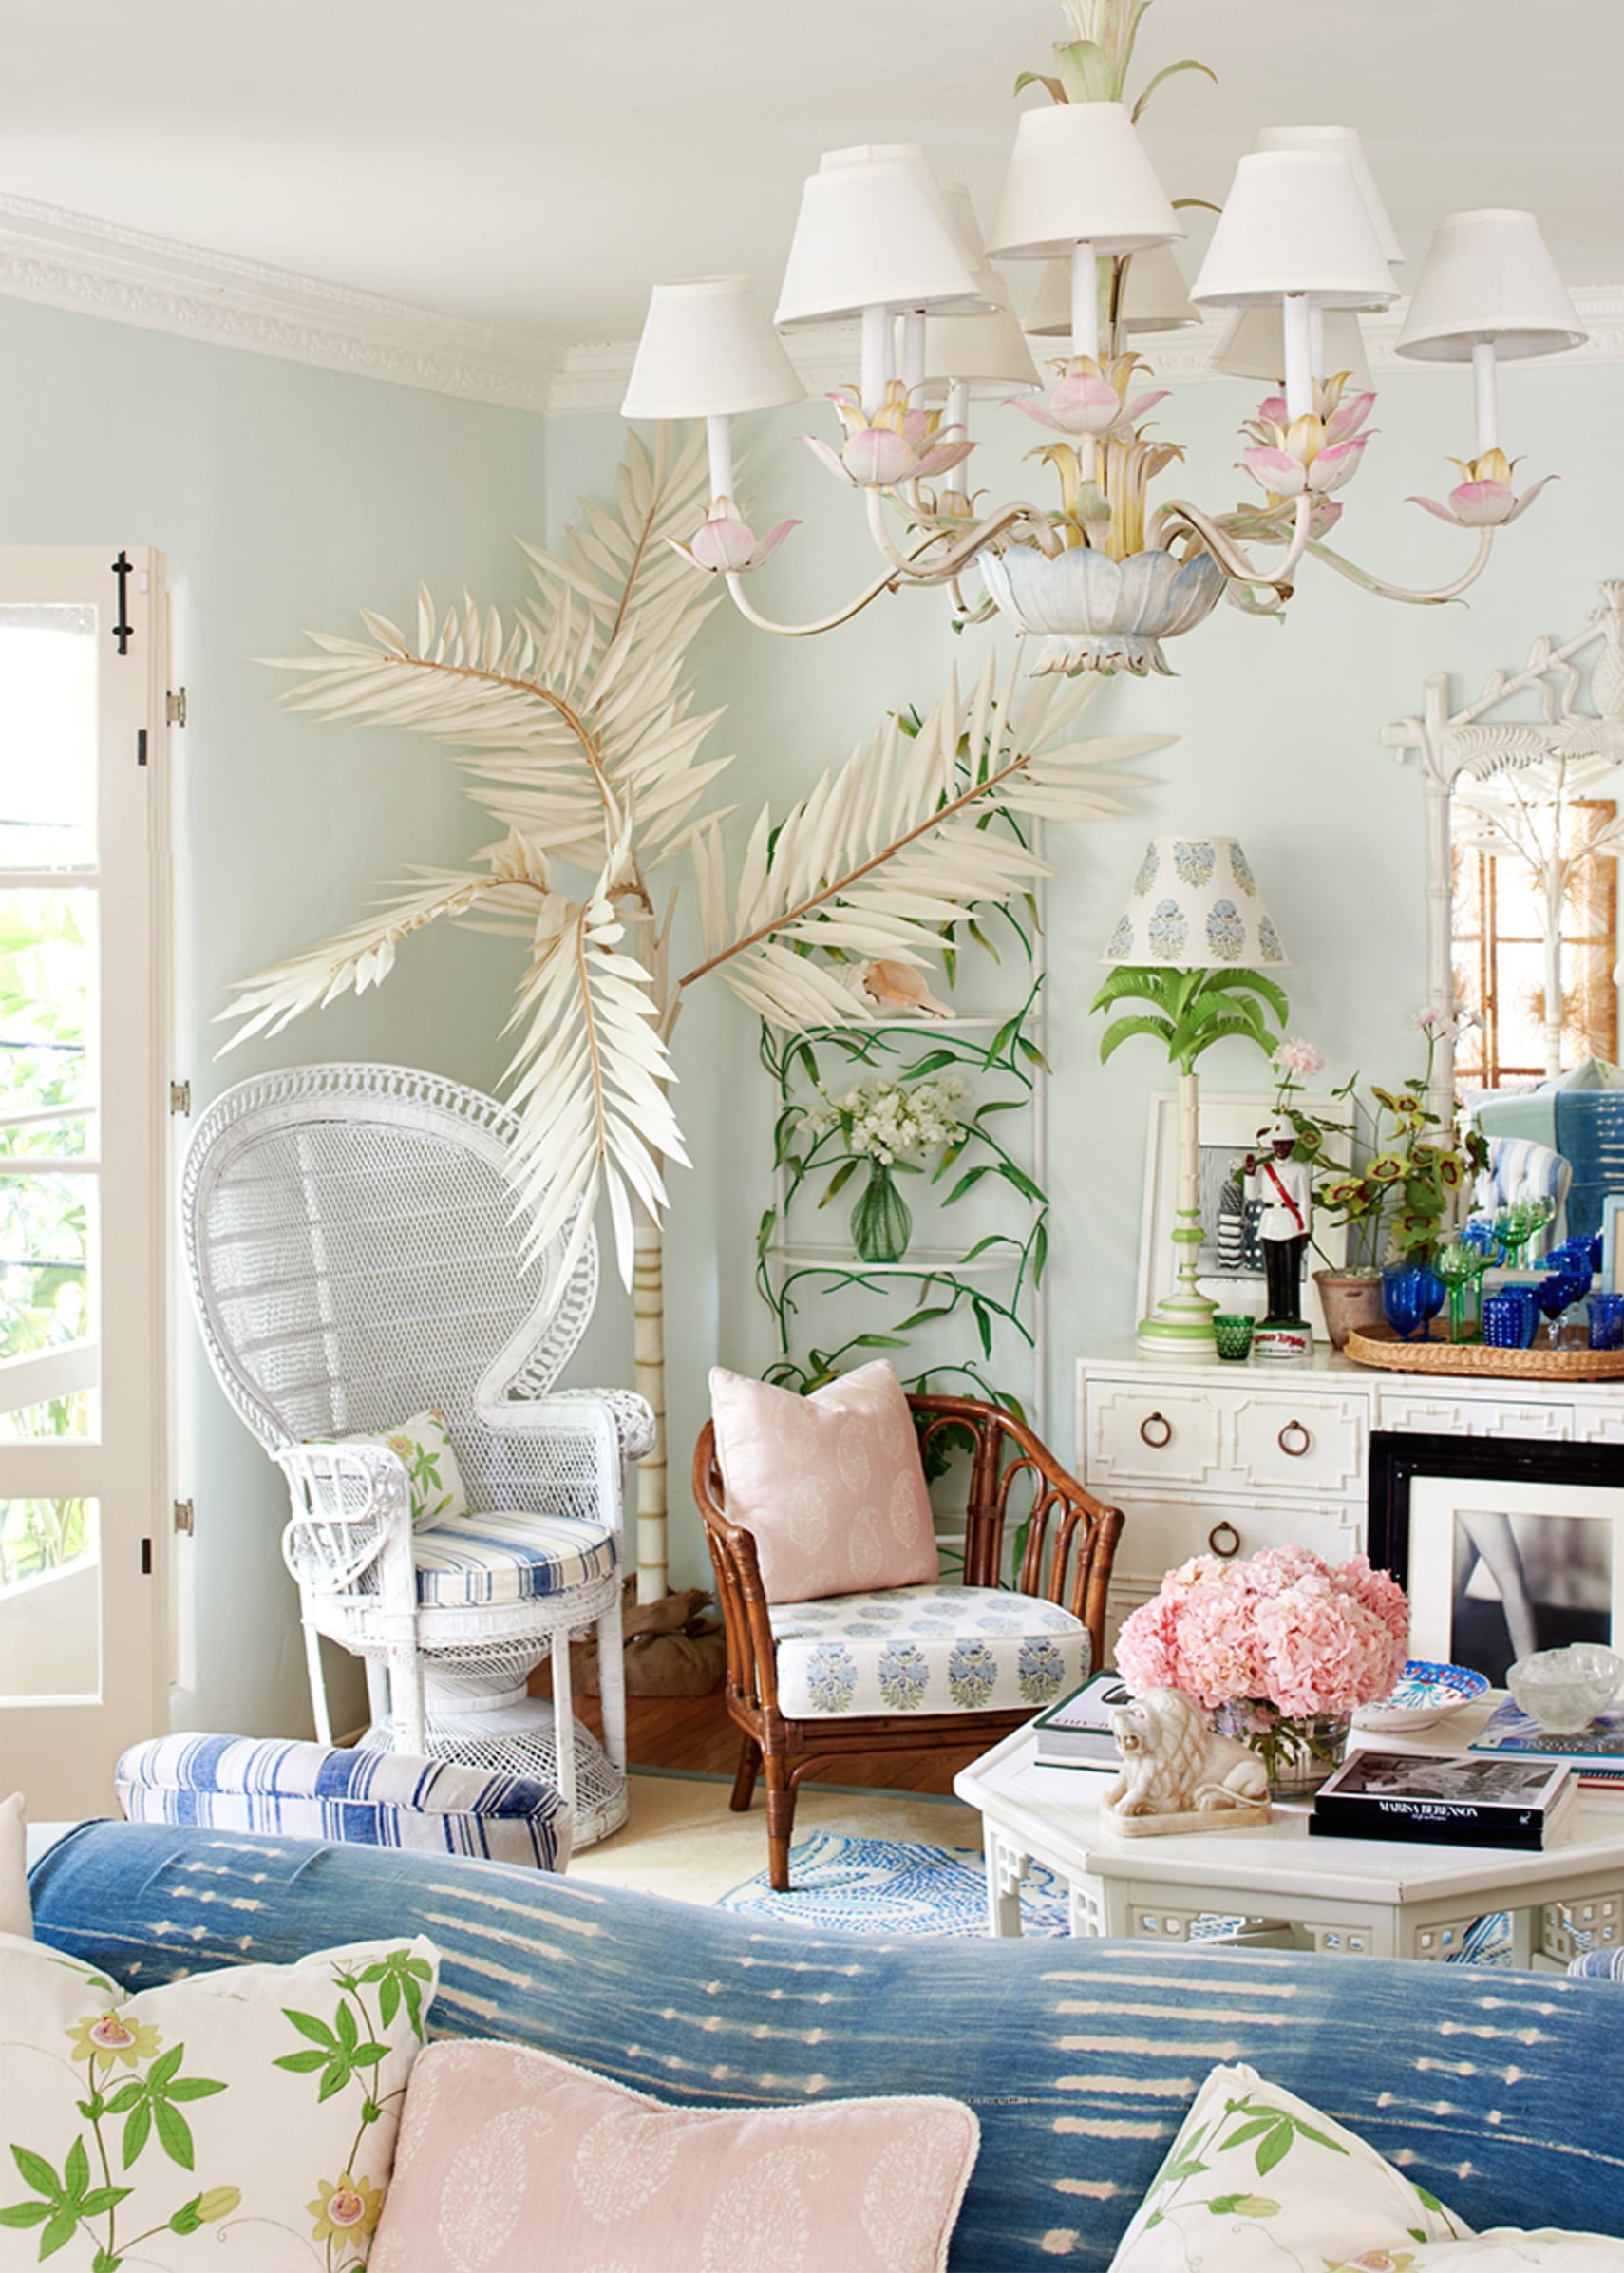 rebecca de ravenel's beach bohemian living room with preppy whimsical details| house tour on coco kelley